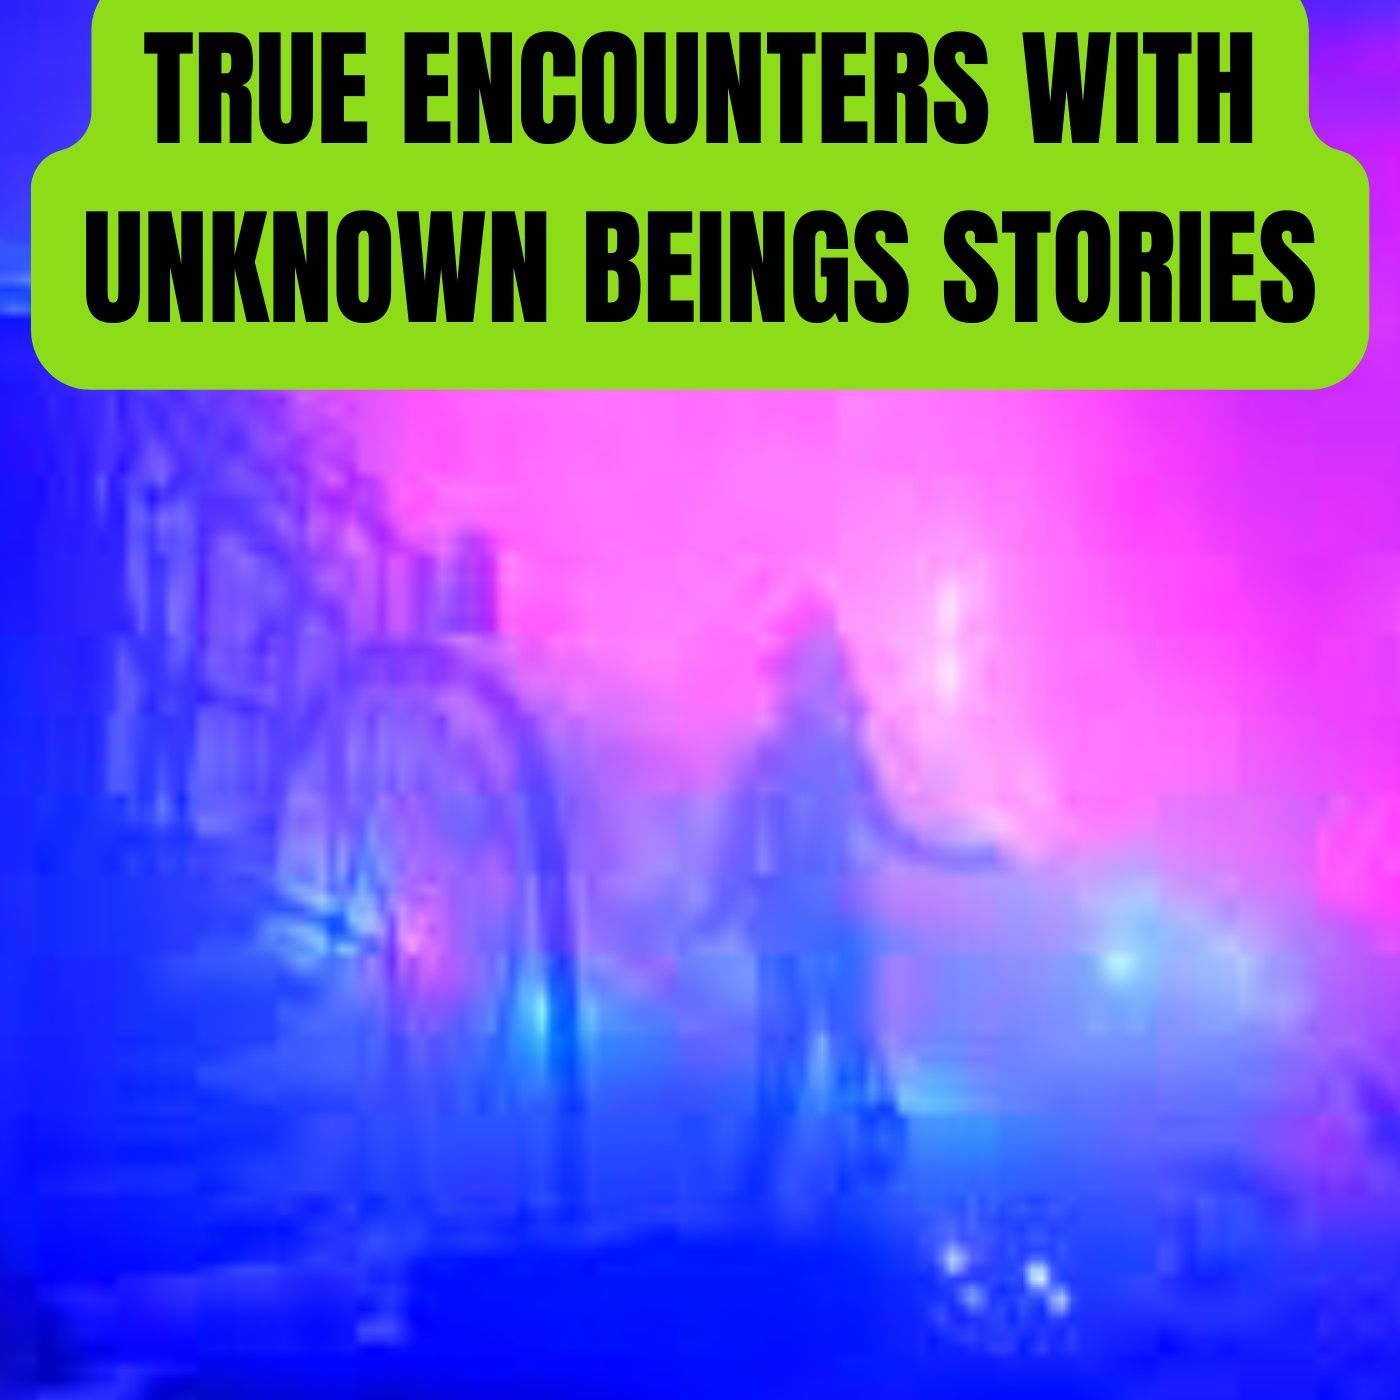 [Serious] Encounters with Aliens and Other Paranormal Creatures Beings Stories